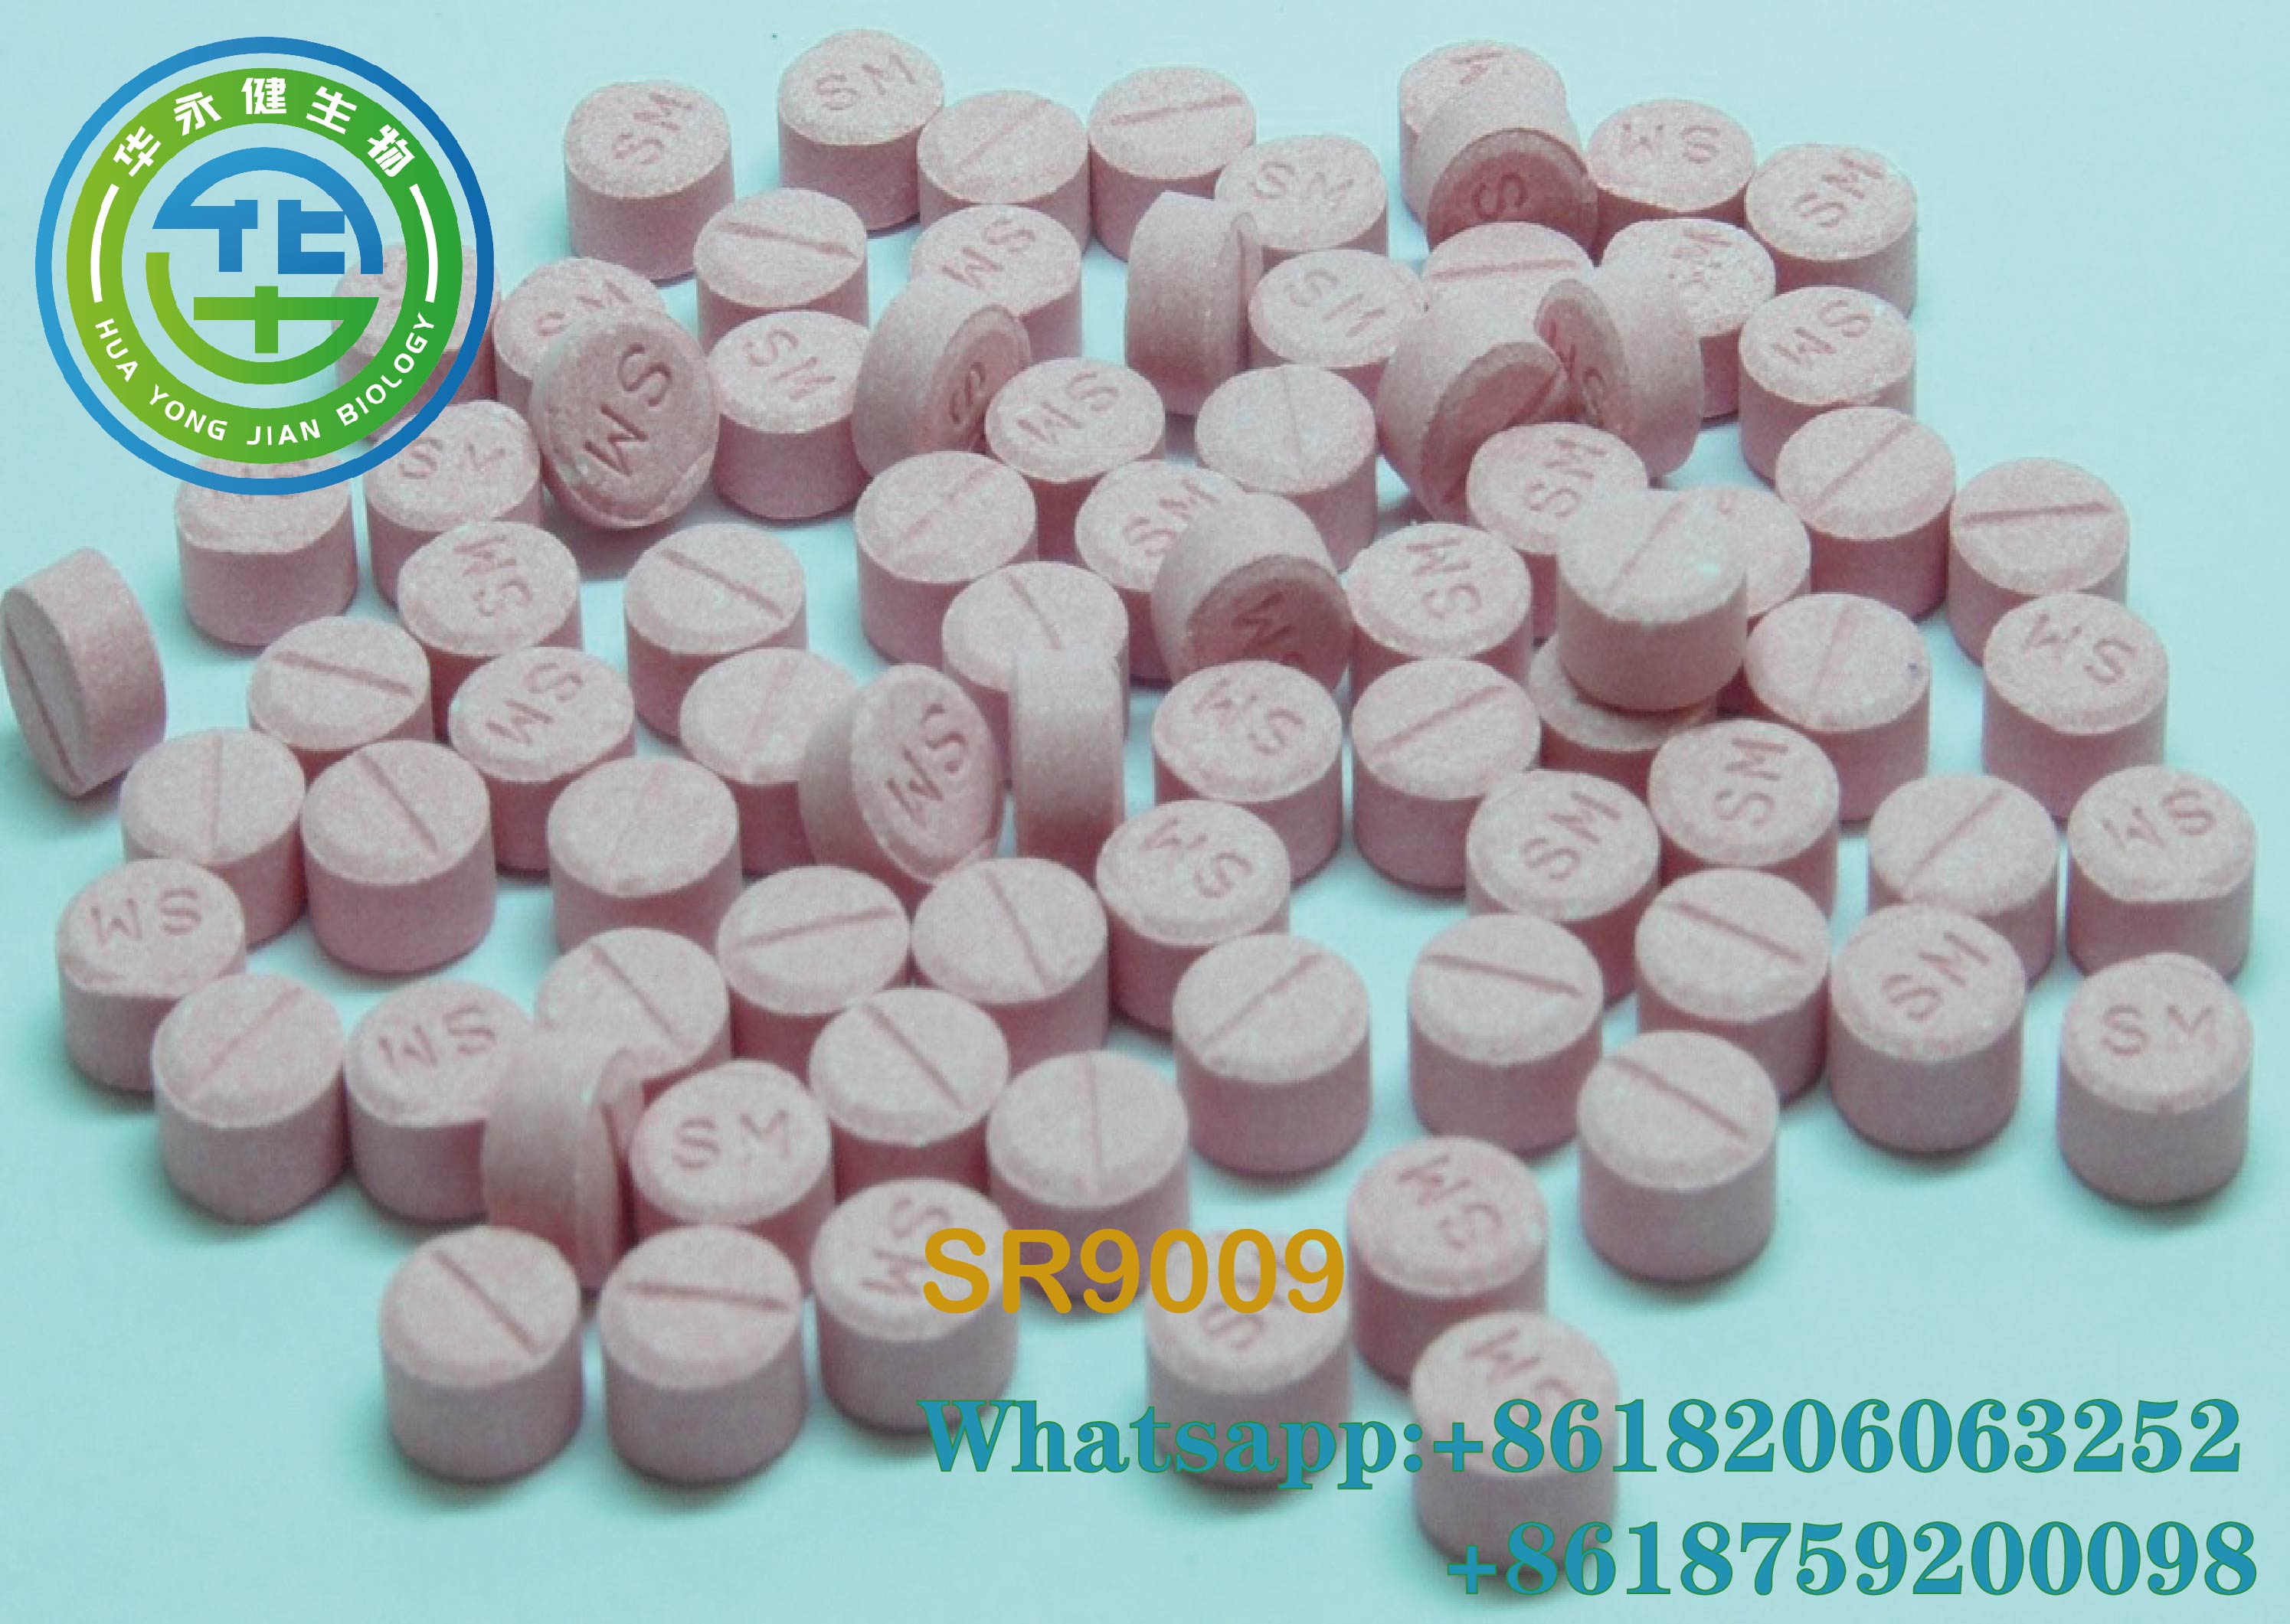 SR9009 SARMs Raw Powder In Pills Stenabolic 100pills/bottleSave Mass Wasting Reduce Androgenic Side Effects